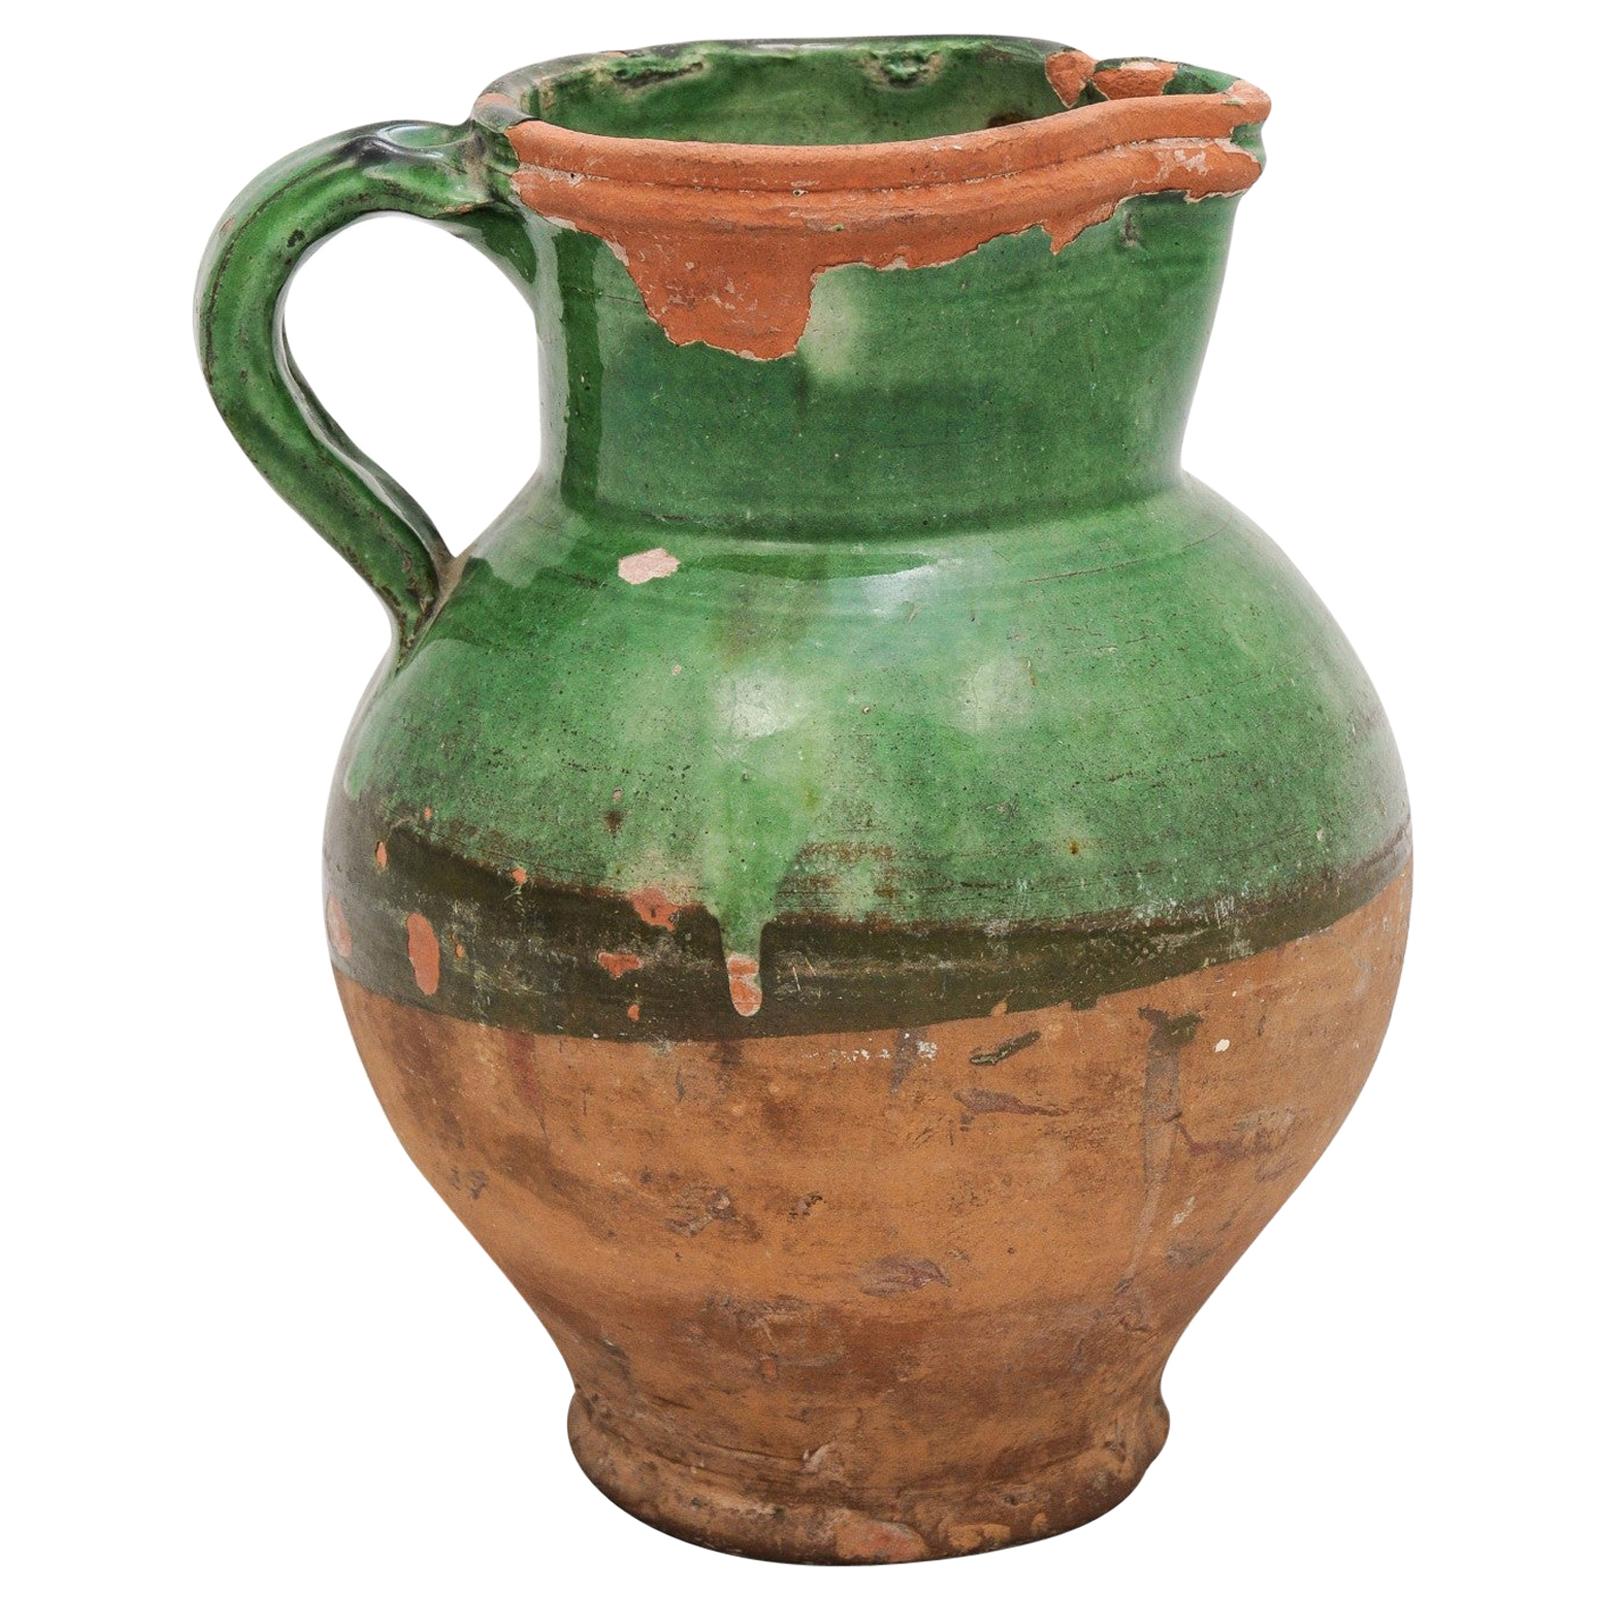 French Provincial 19th Century Green Glazed Pitcher with Distressed Patina